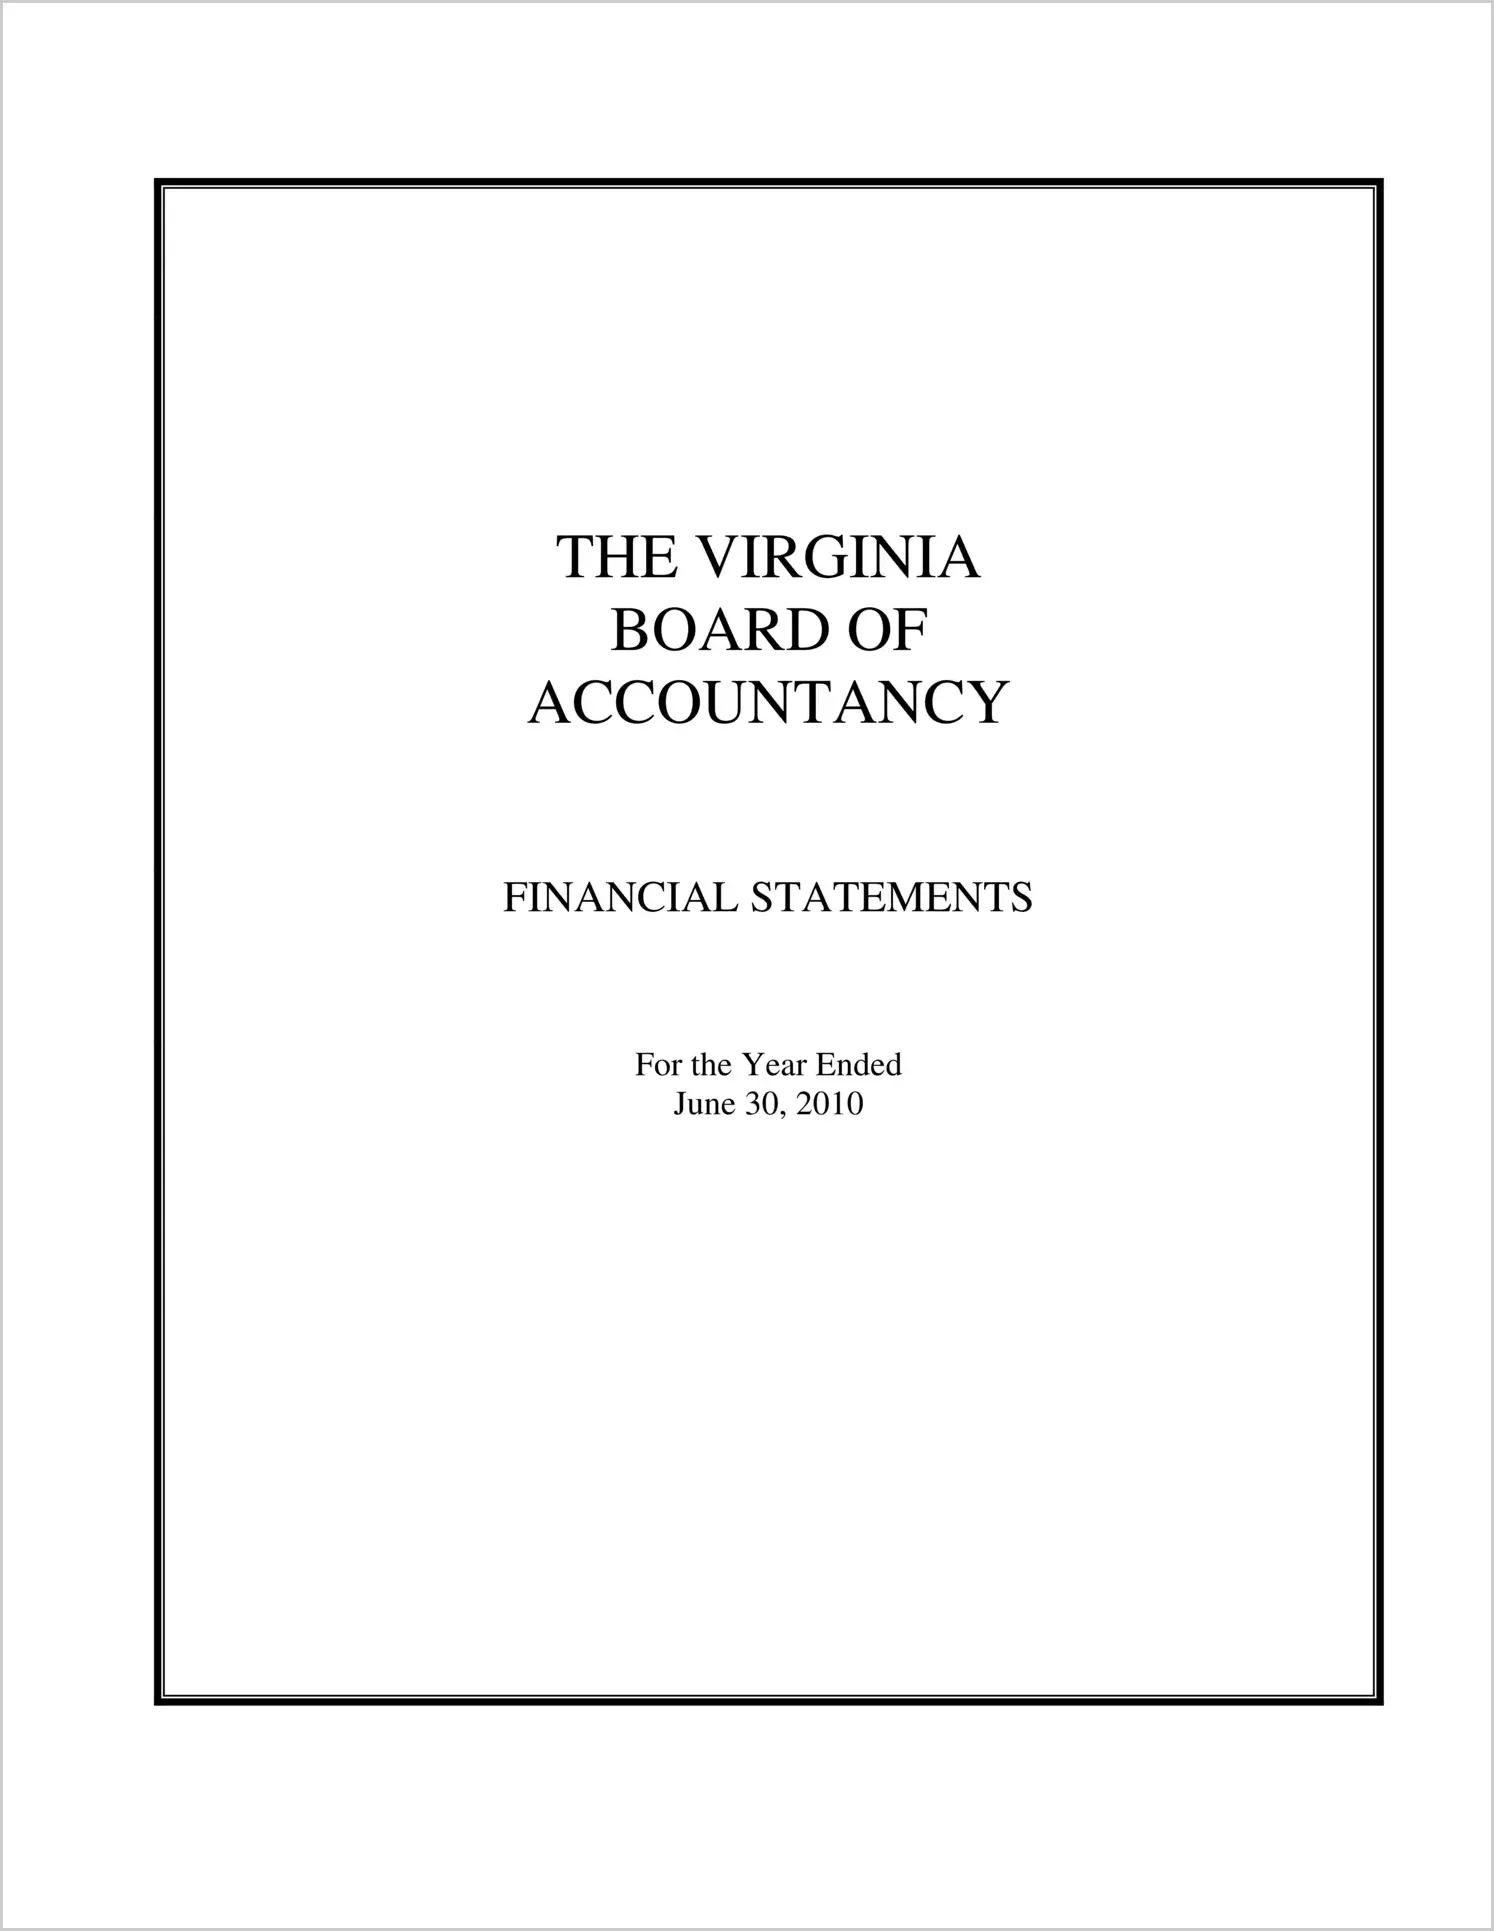 Virginia Board of Accountancy Financial Statements for the year ended June 30, 2010